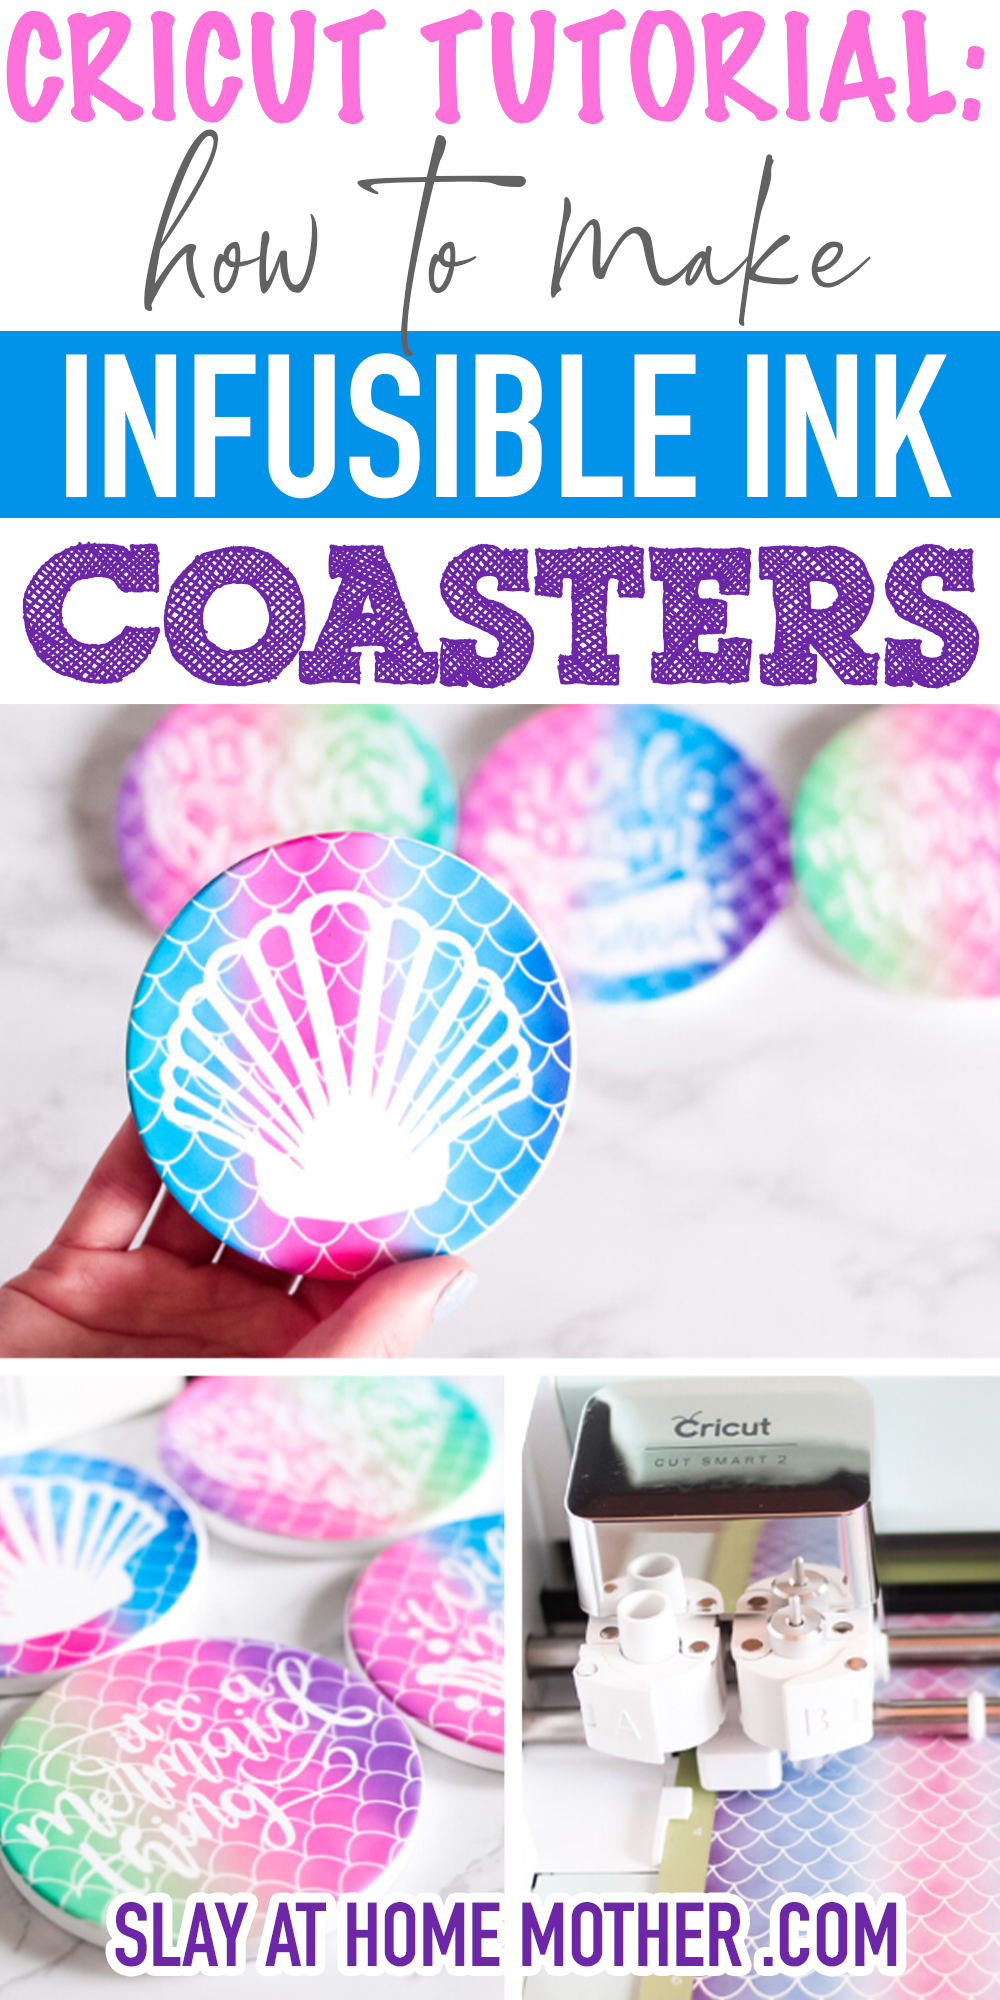 cricut infusible ink coasters